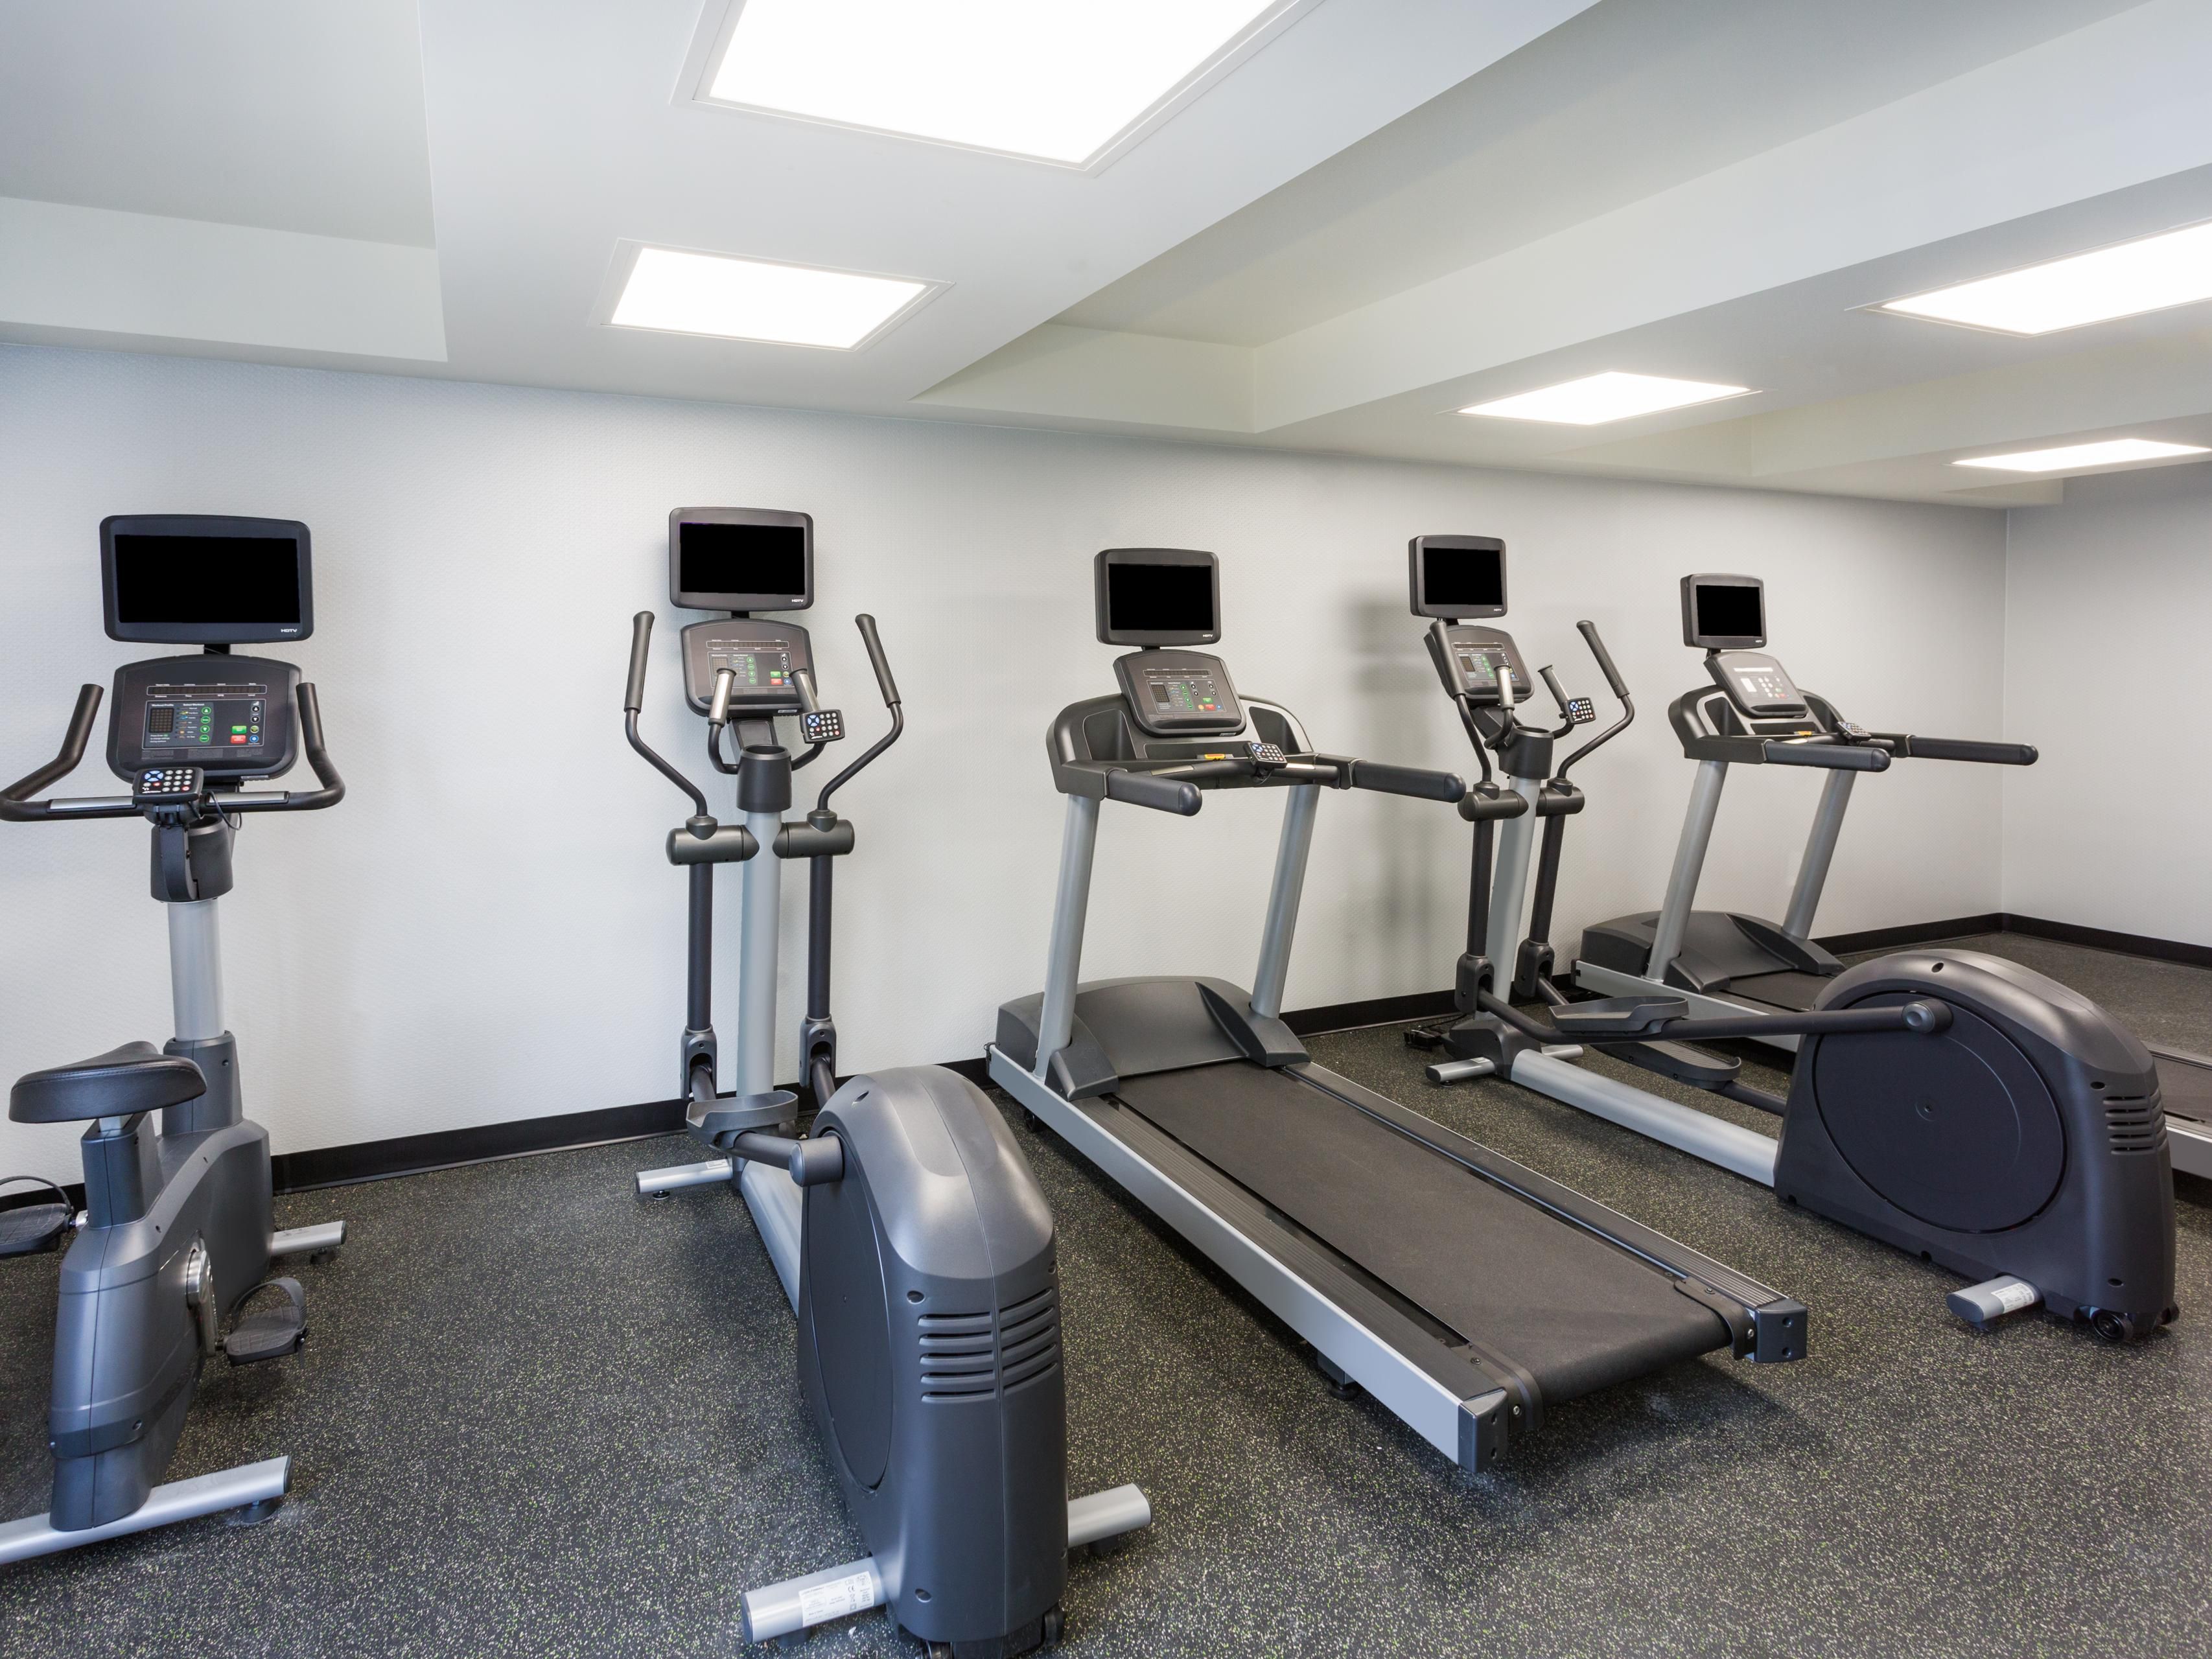 Our complimentary fitness center makes it easy for you to work out, have fun and stay fit.